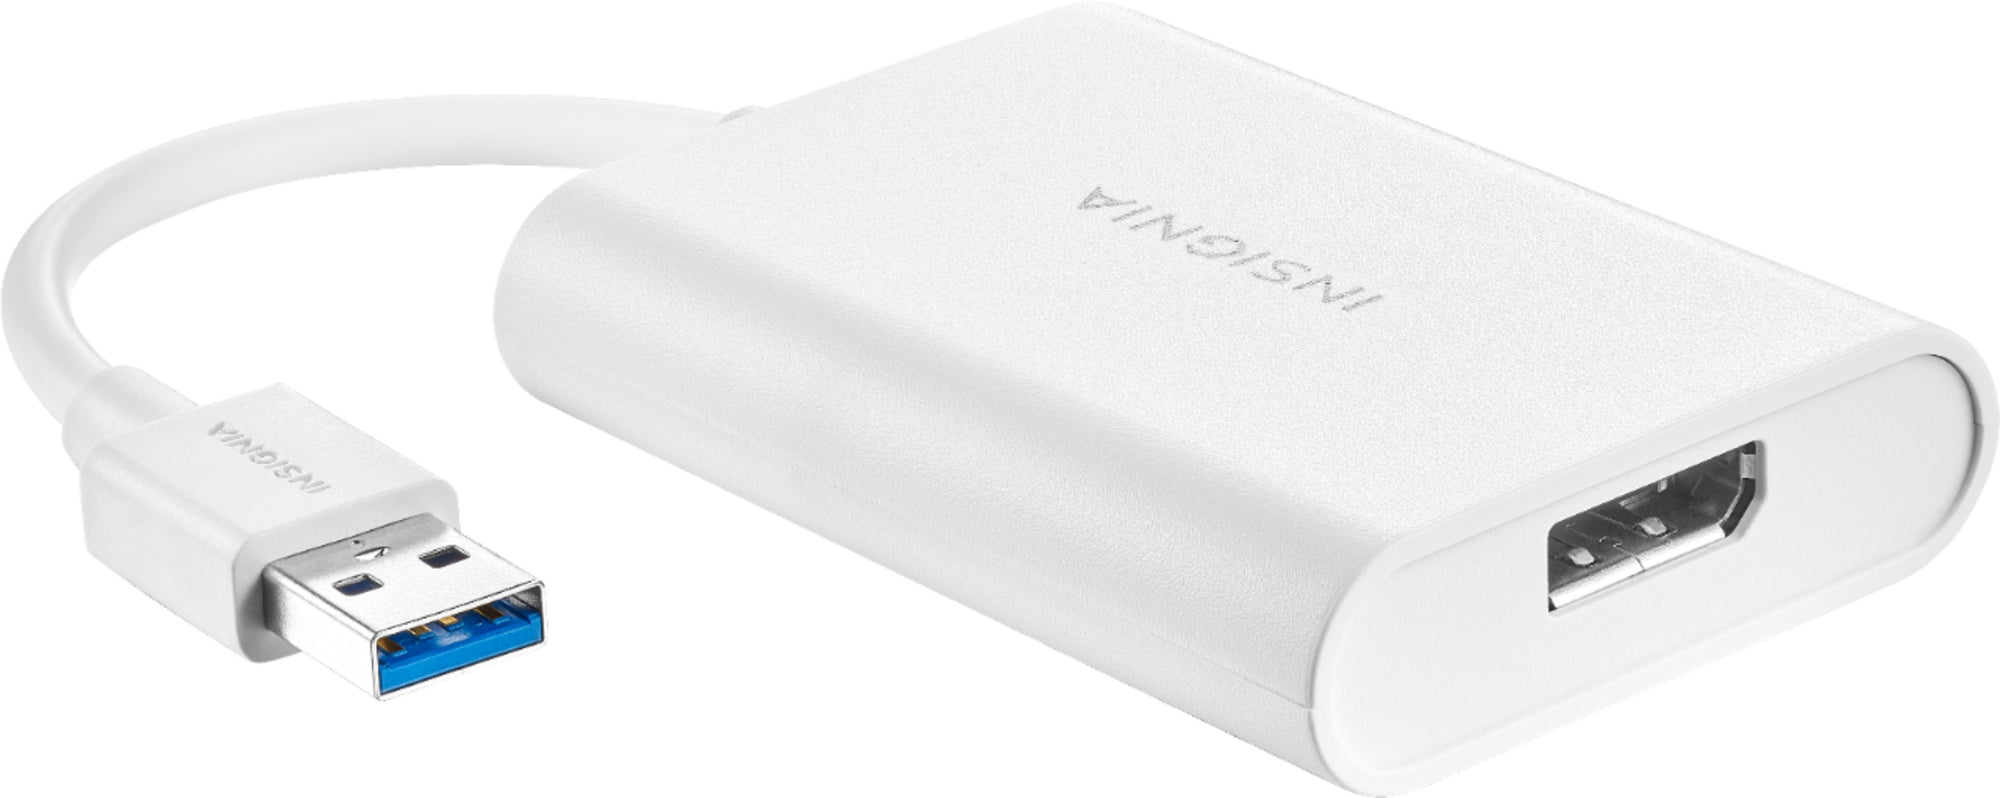 Insignia™ - NS-PCA3D USB 3.0 to DisplayPort Adapter - White